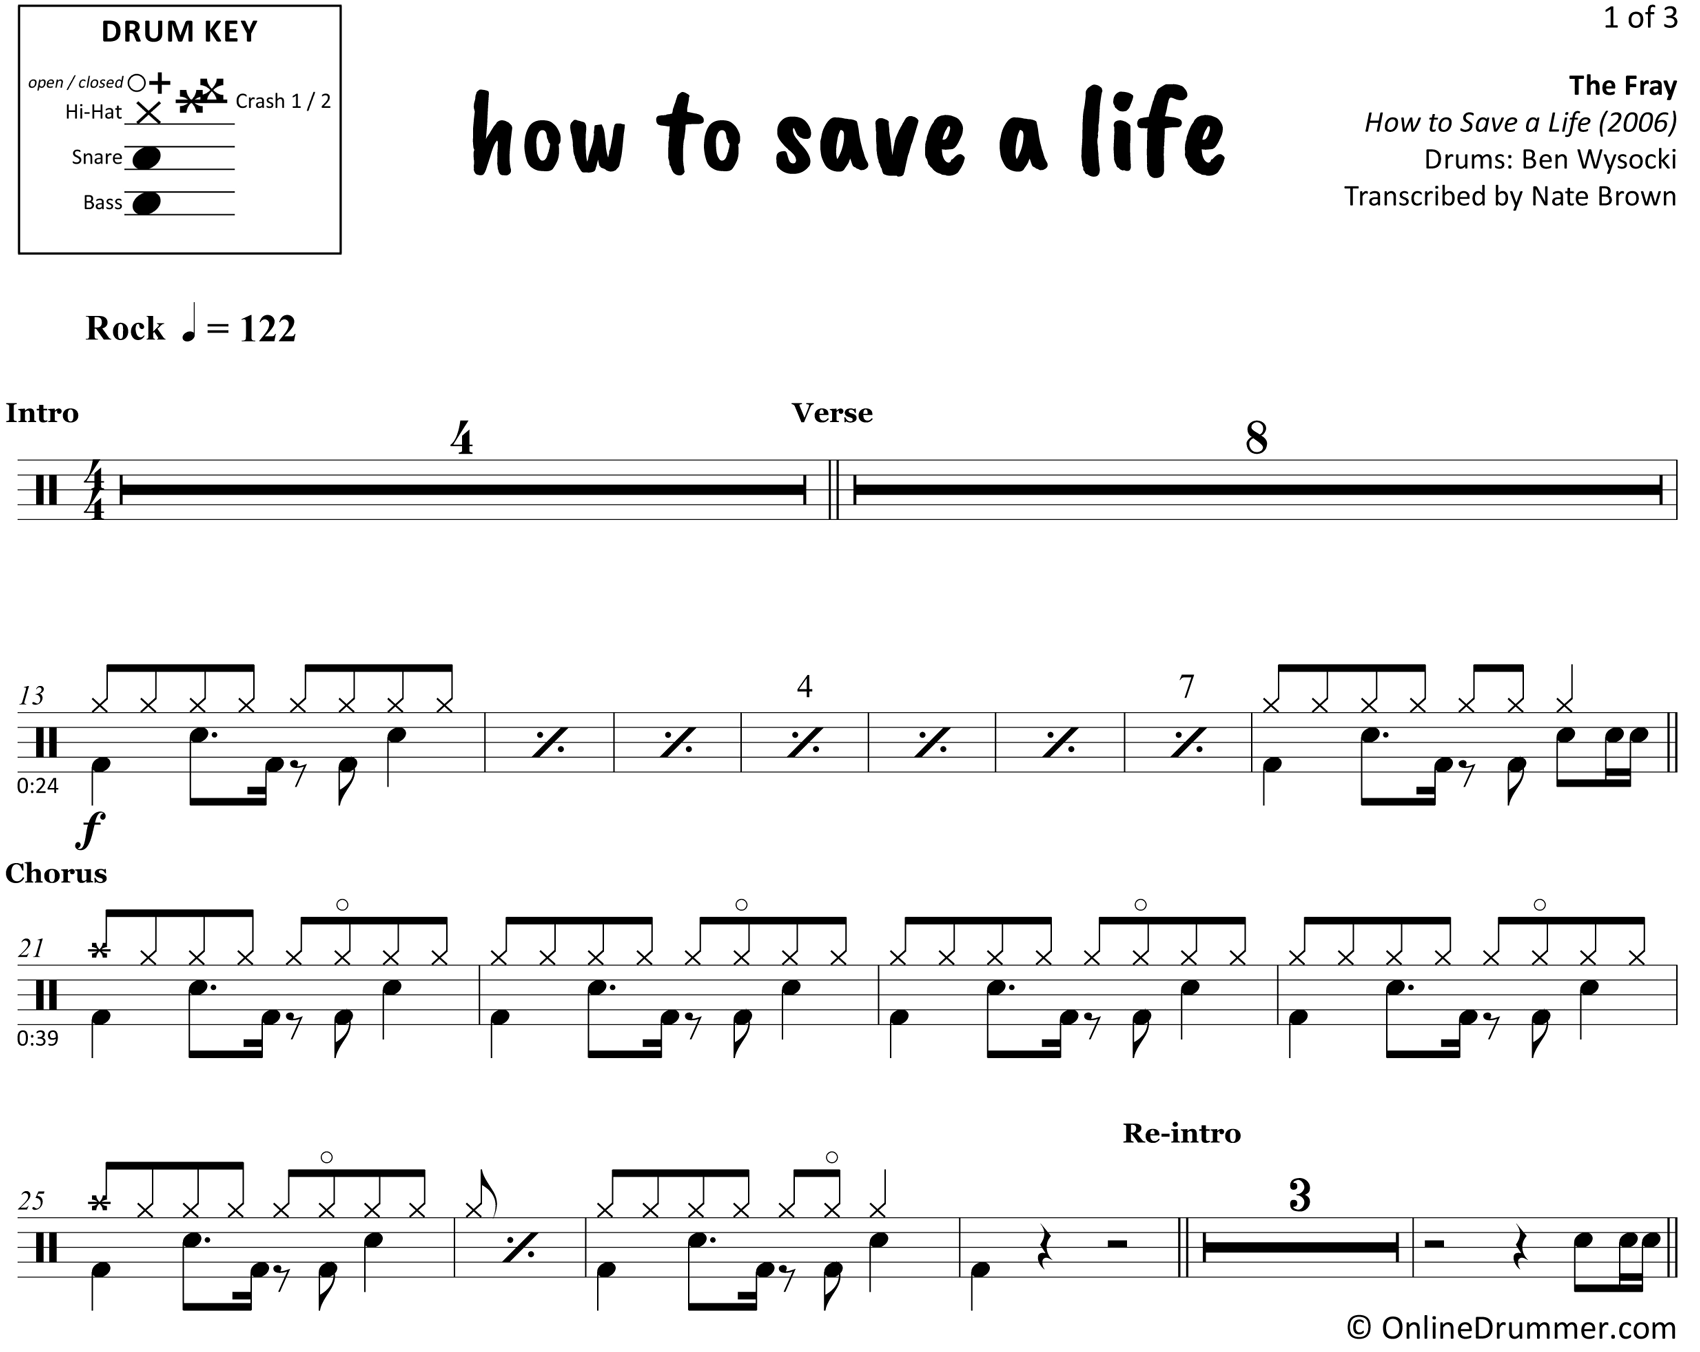 How to Save a Life - The Fray - Drum Sheet Music